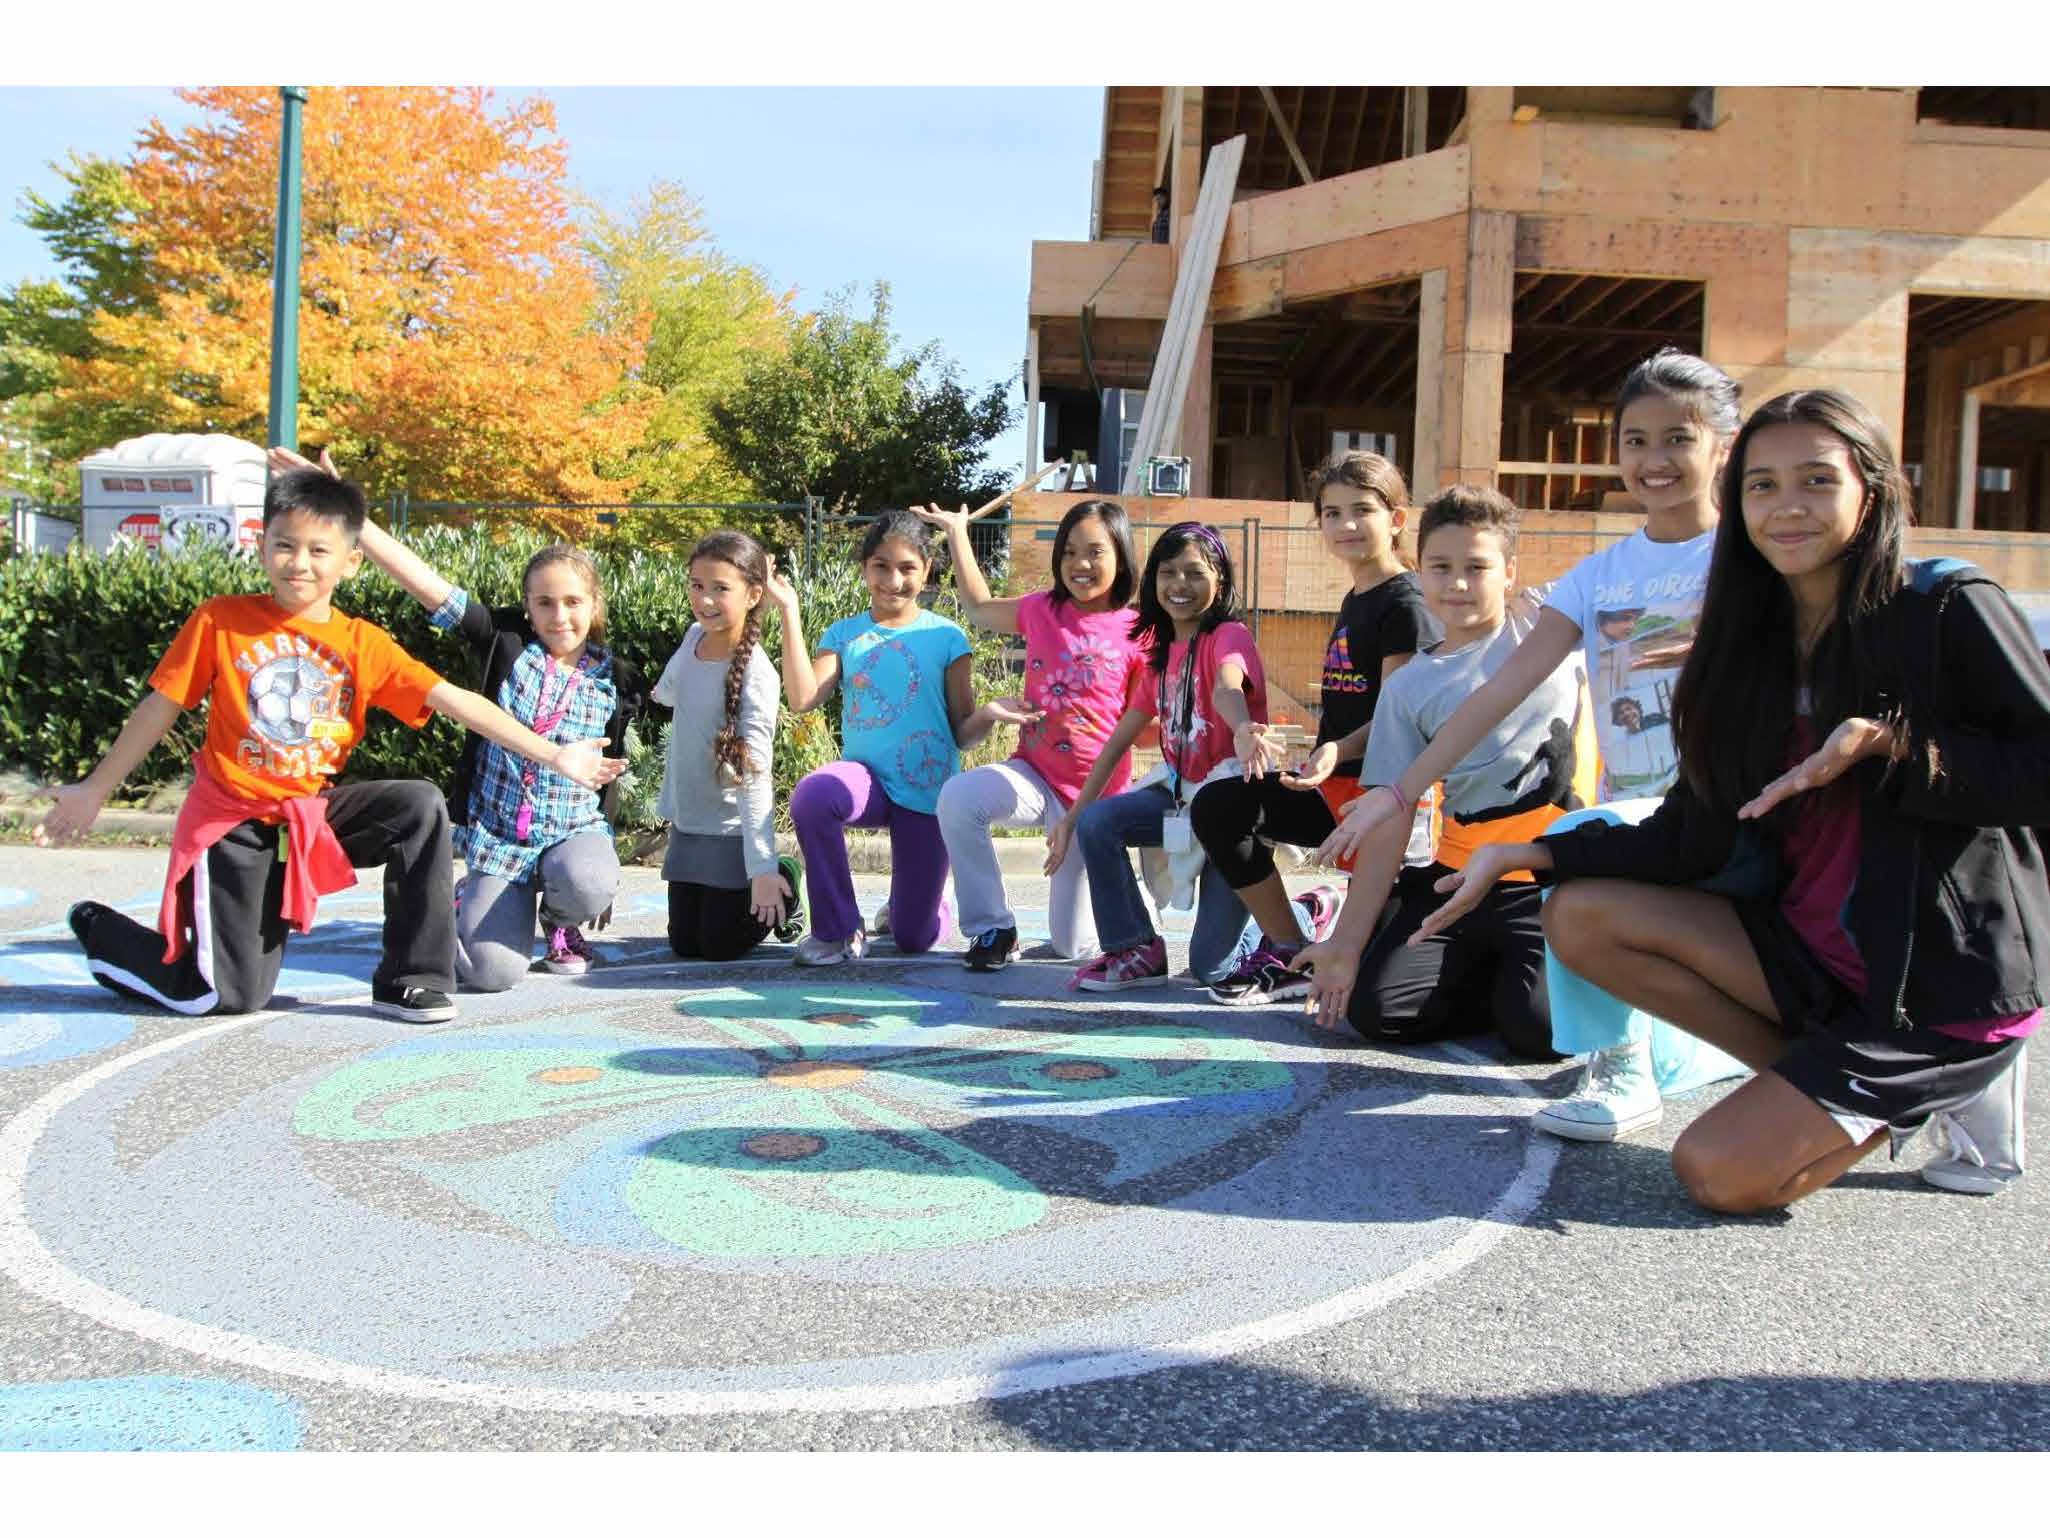  Another excellent example of the Rainway’s community engagement was the Creek Forum. Students from Mt Pleasant Elementary school participated during the year-long program. 